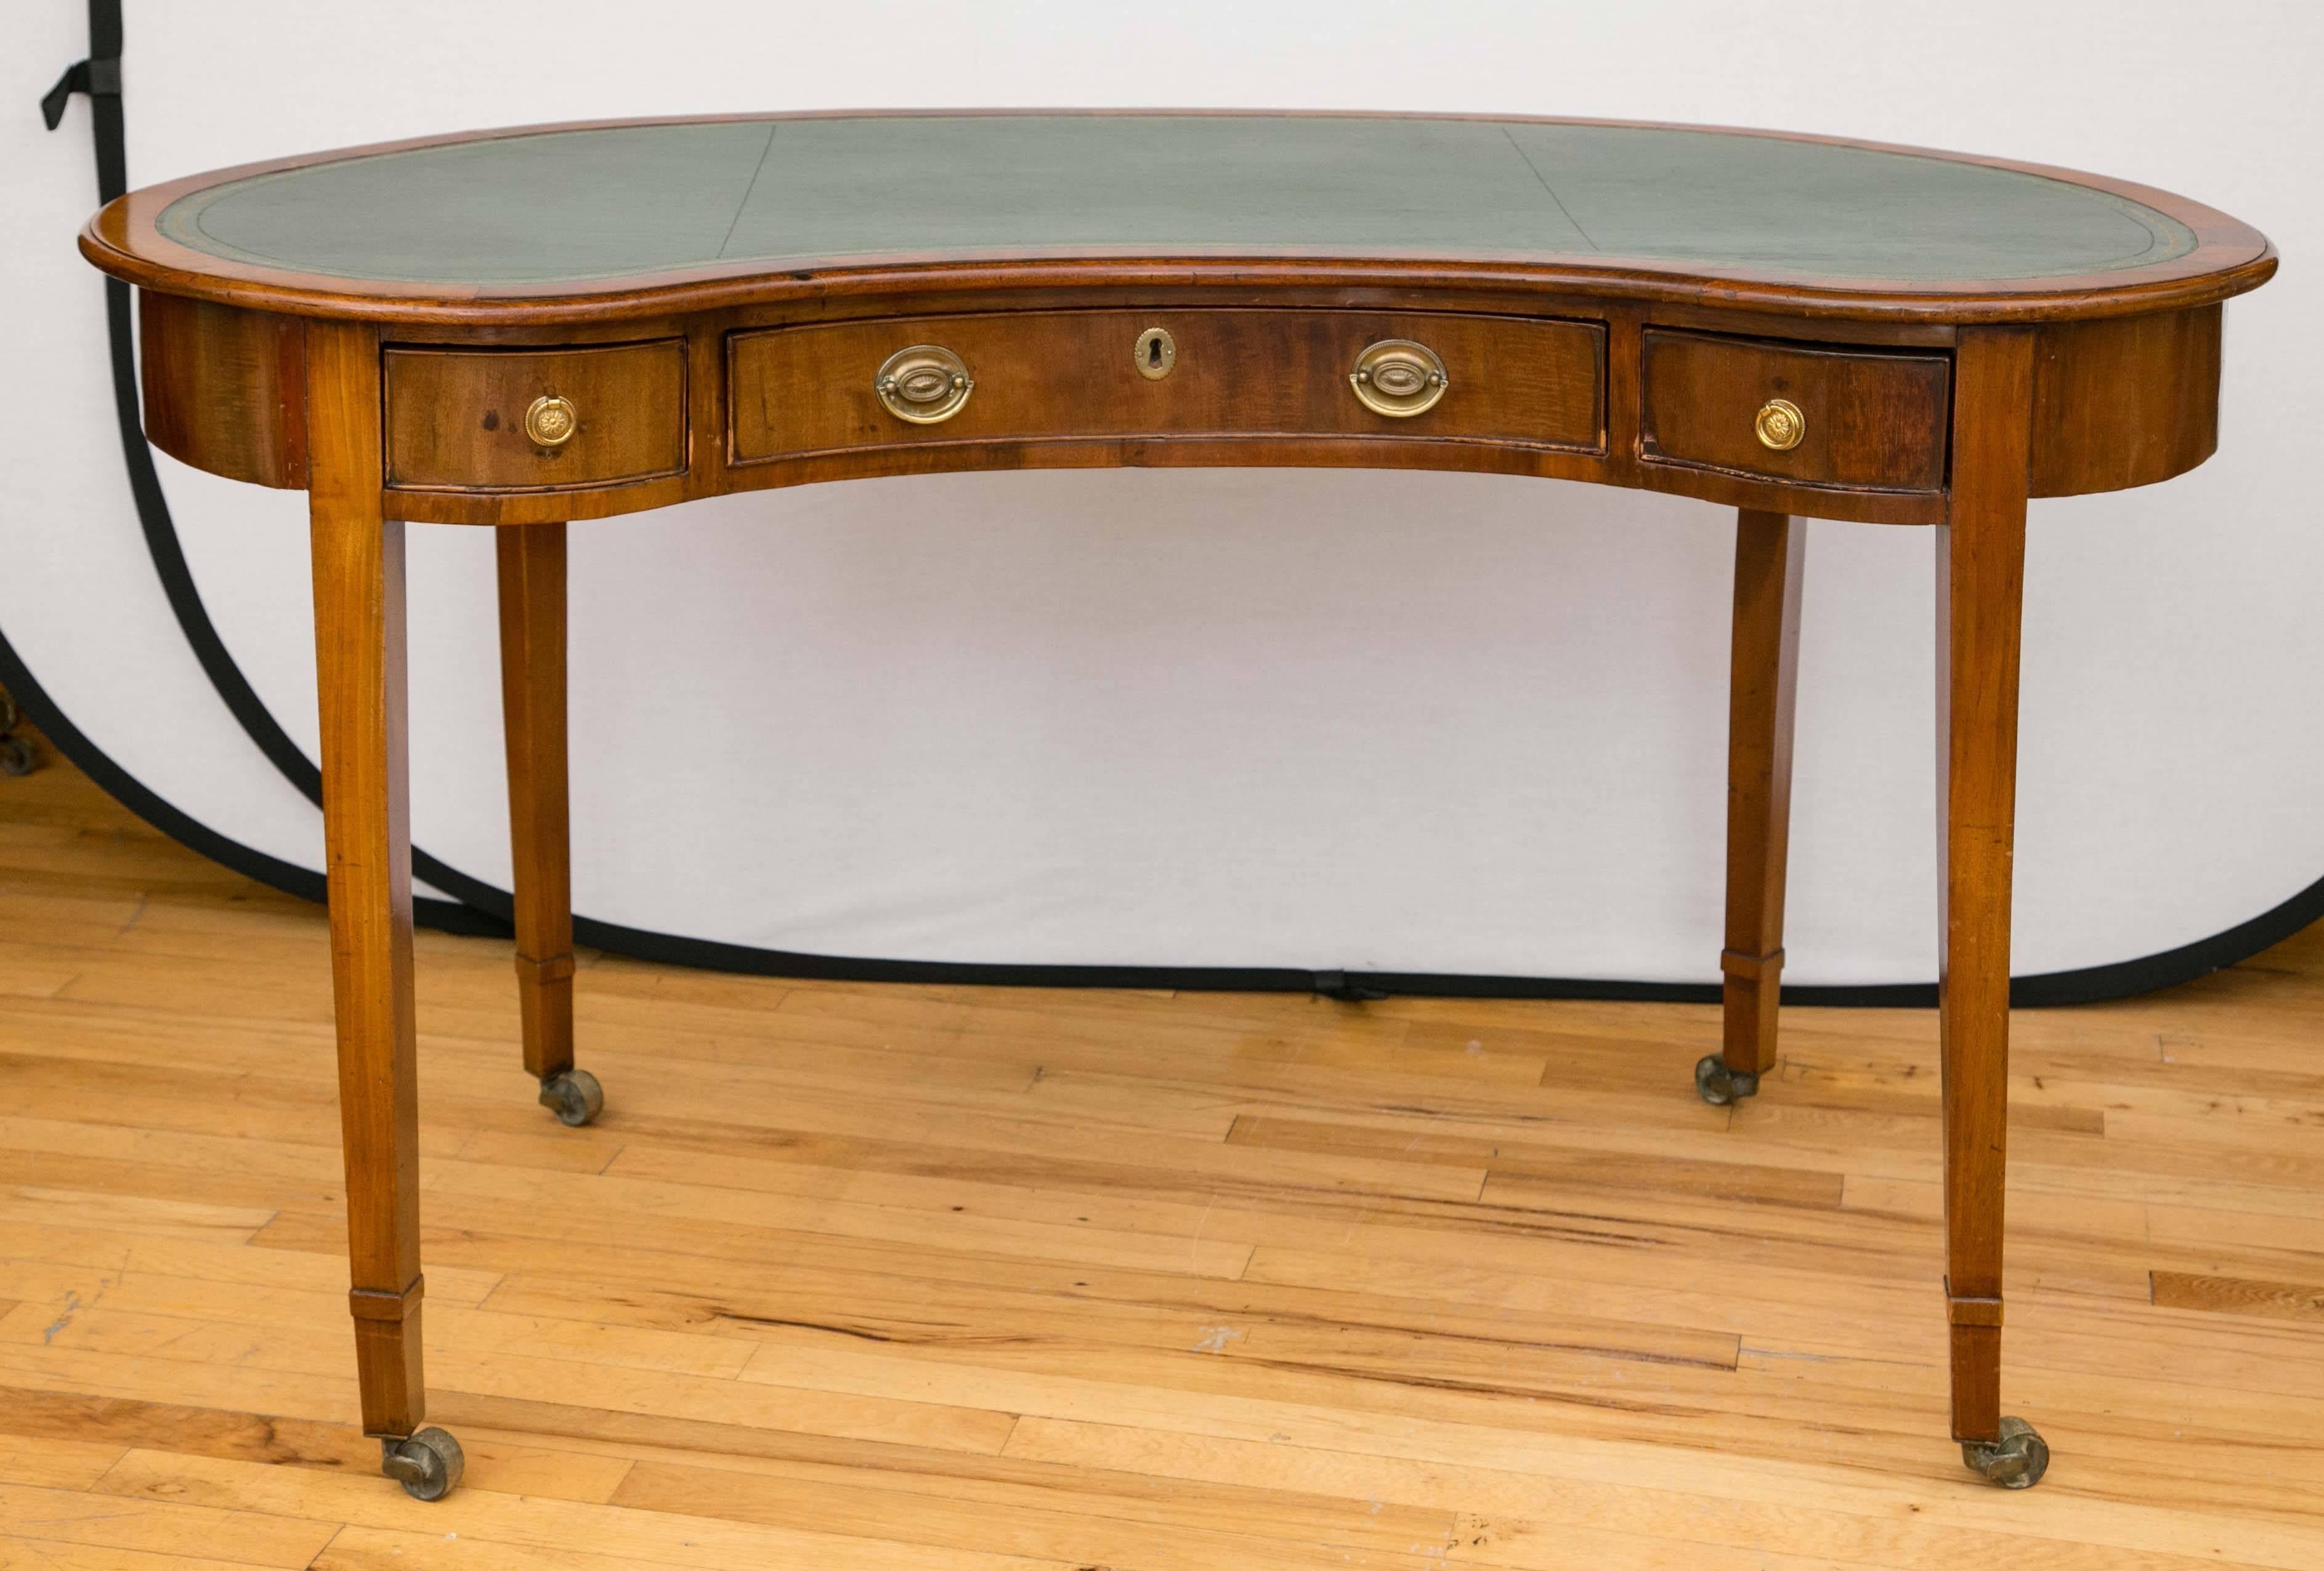 A 1790s English rosewood writing table in the Hepplewhite style. The apron is fitted with a large center drawer and two smaller drawers on either side. The table stands on tapering legs that terminate in brass castors. The inset tooled and gilt